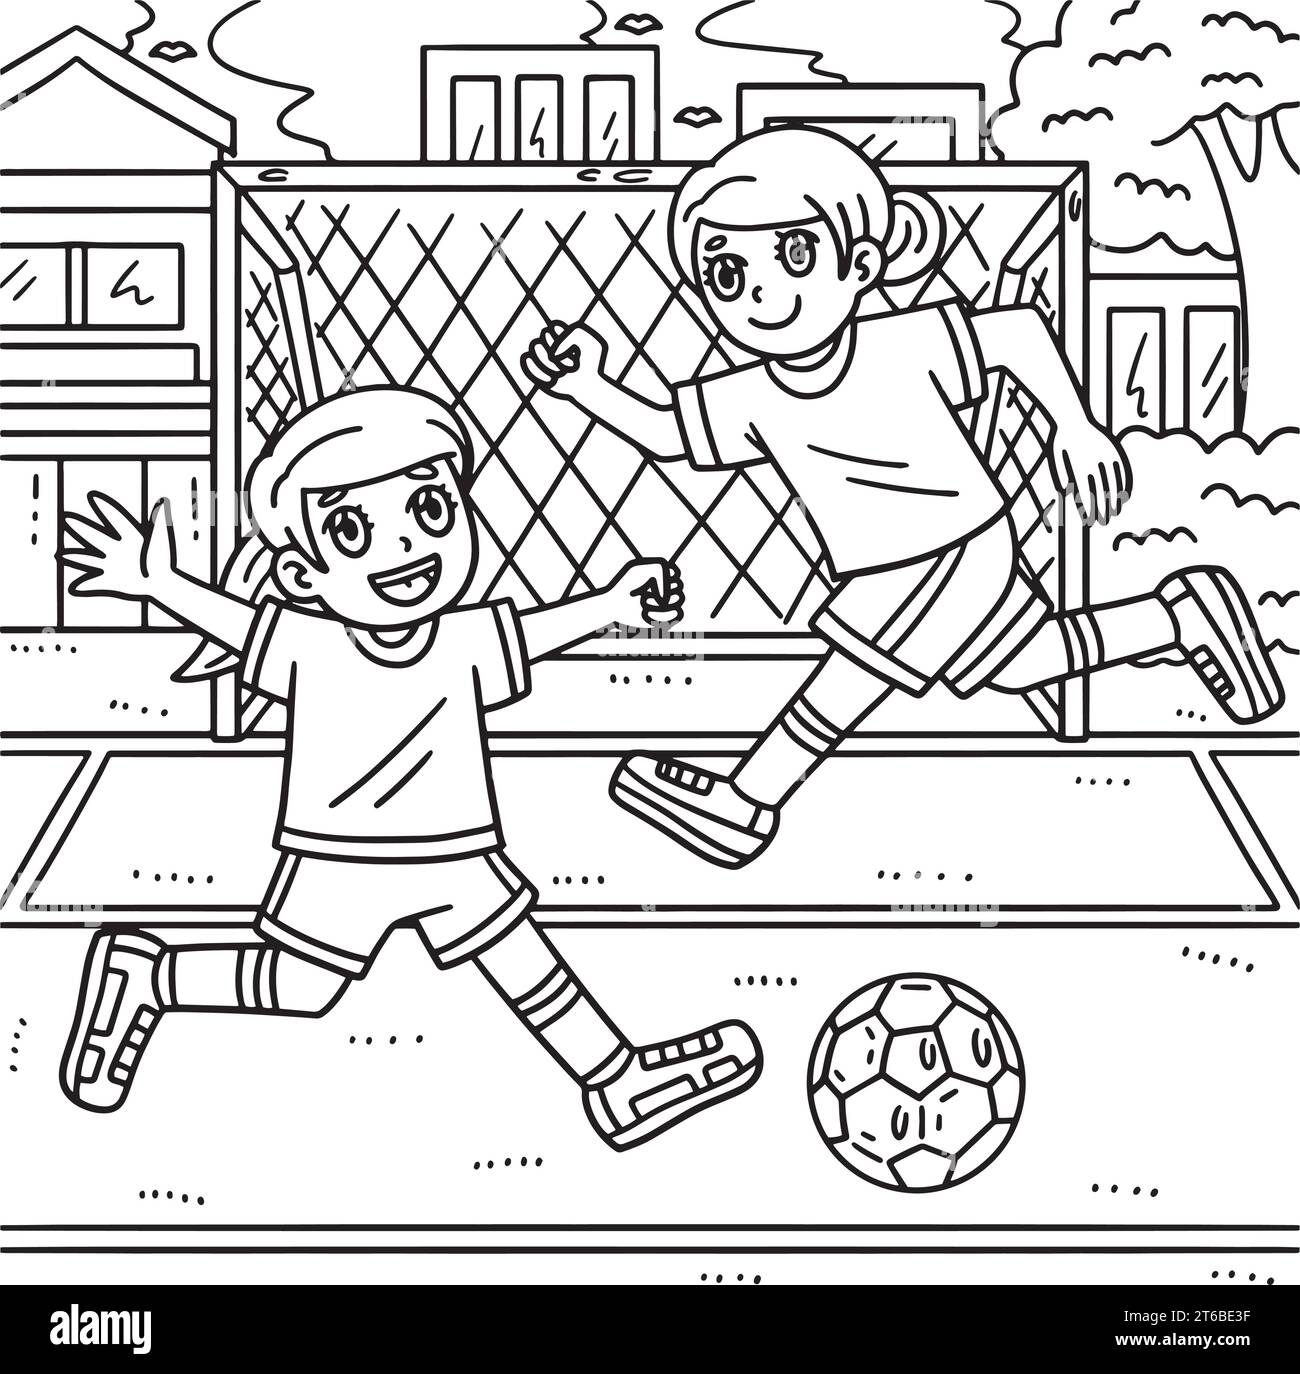 Girls Playing Soccer Coloring Page for Kids Stock Vector